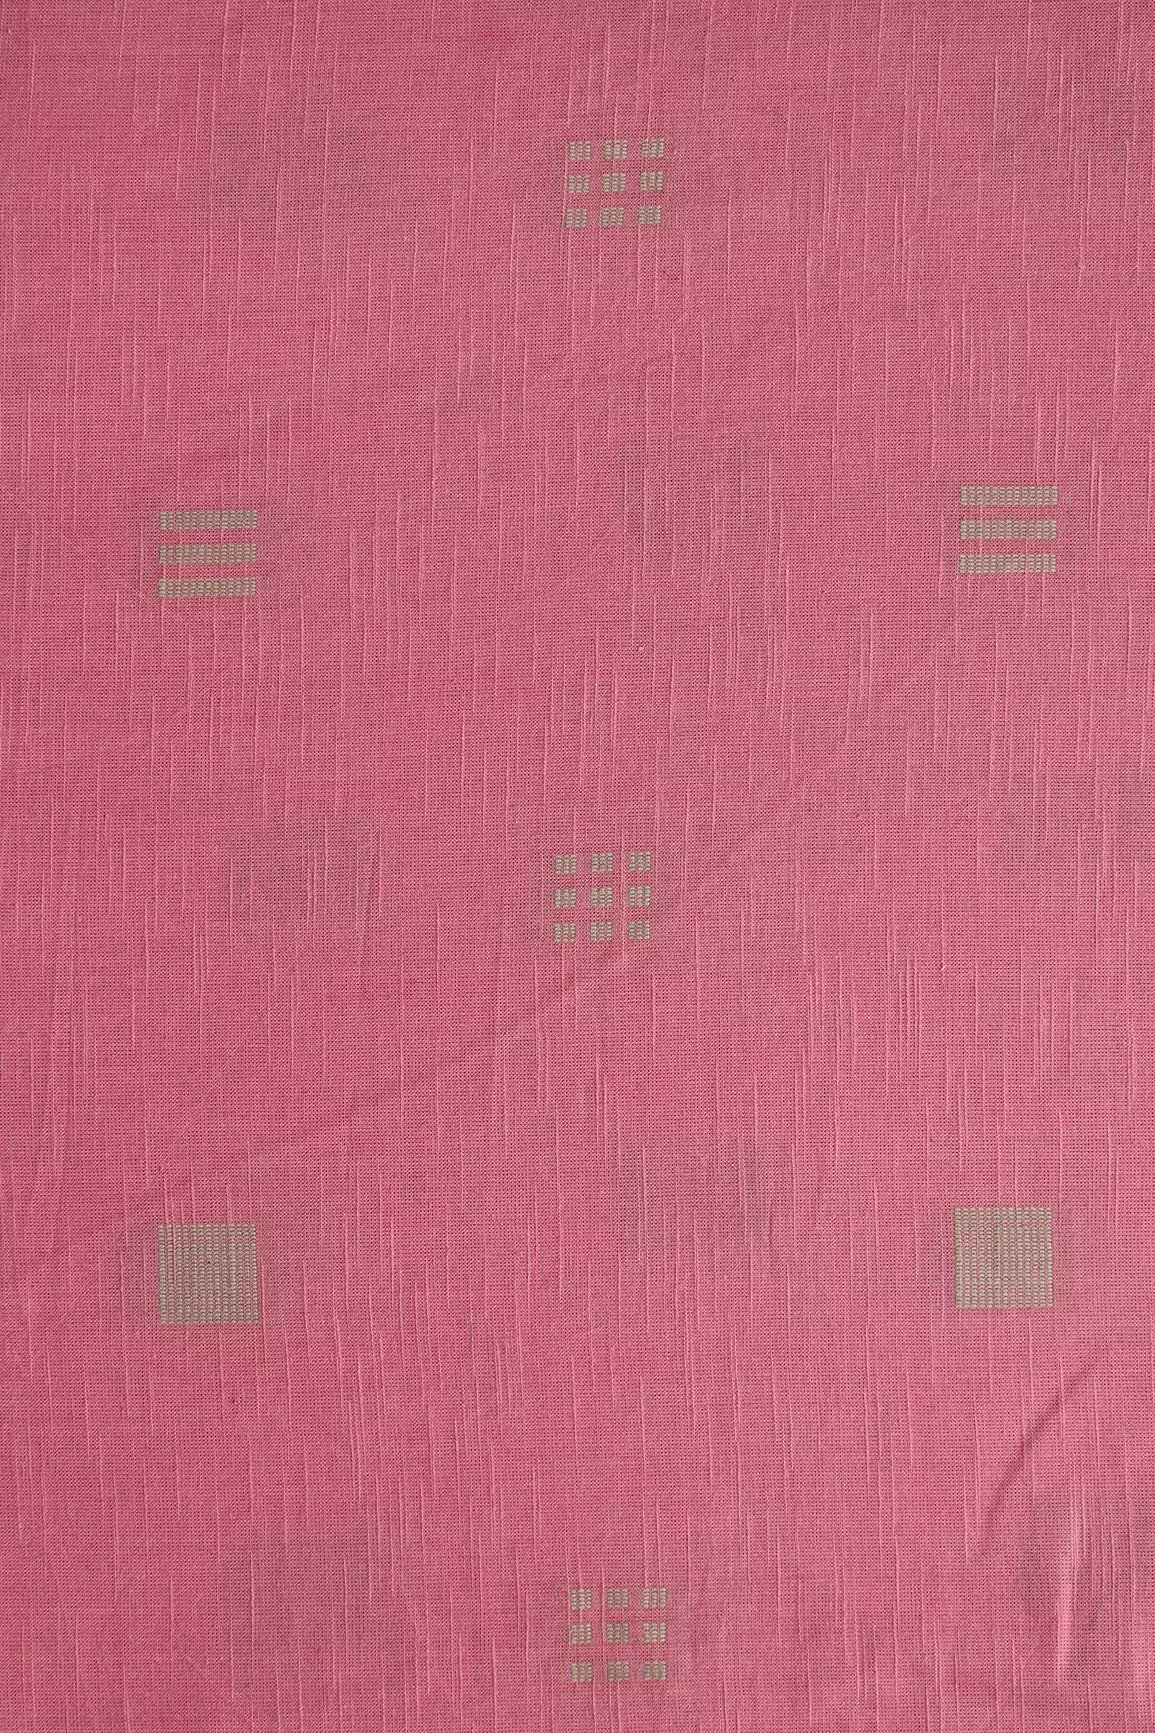 Beige And Pink Geometric Pattern On Handwoven Organic Cotton Fabric